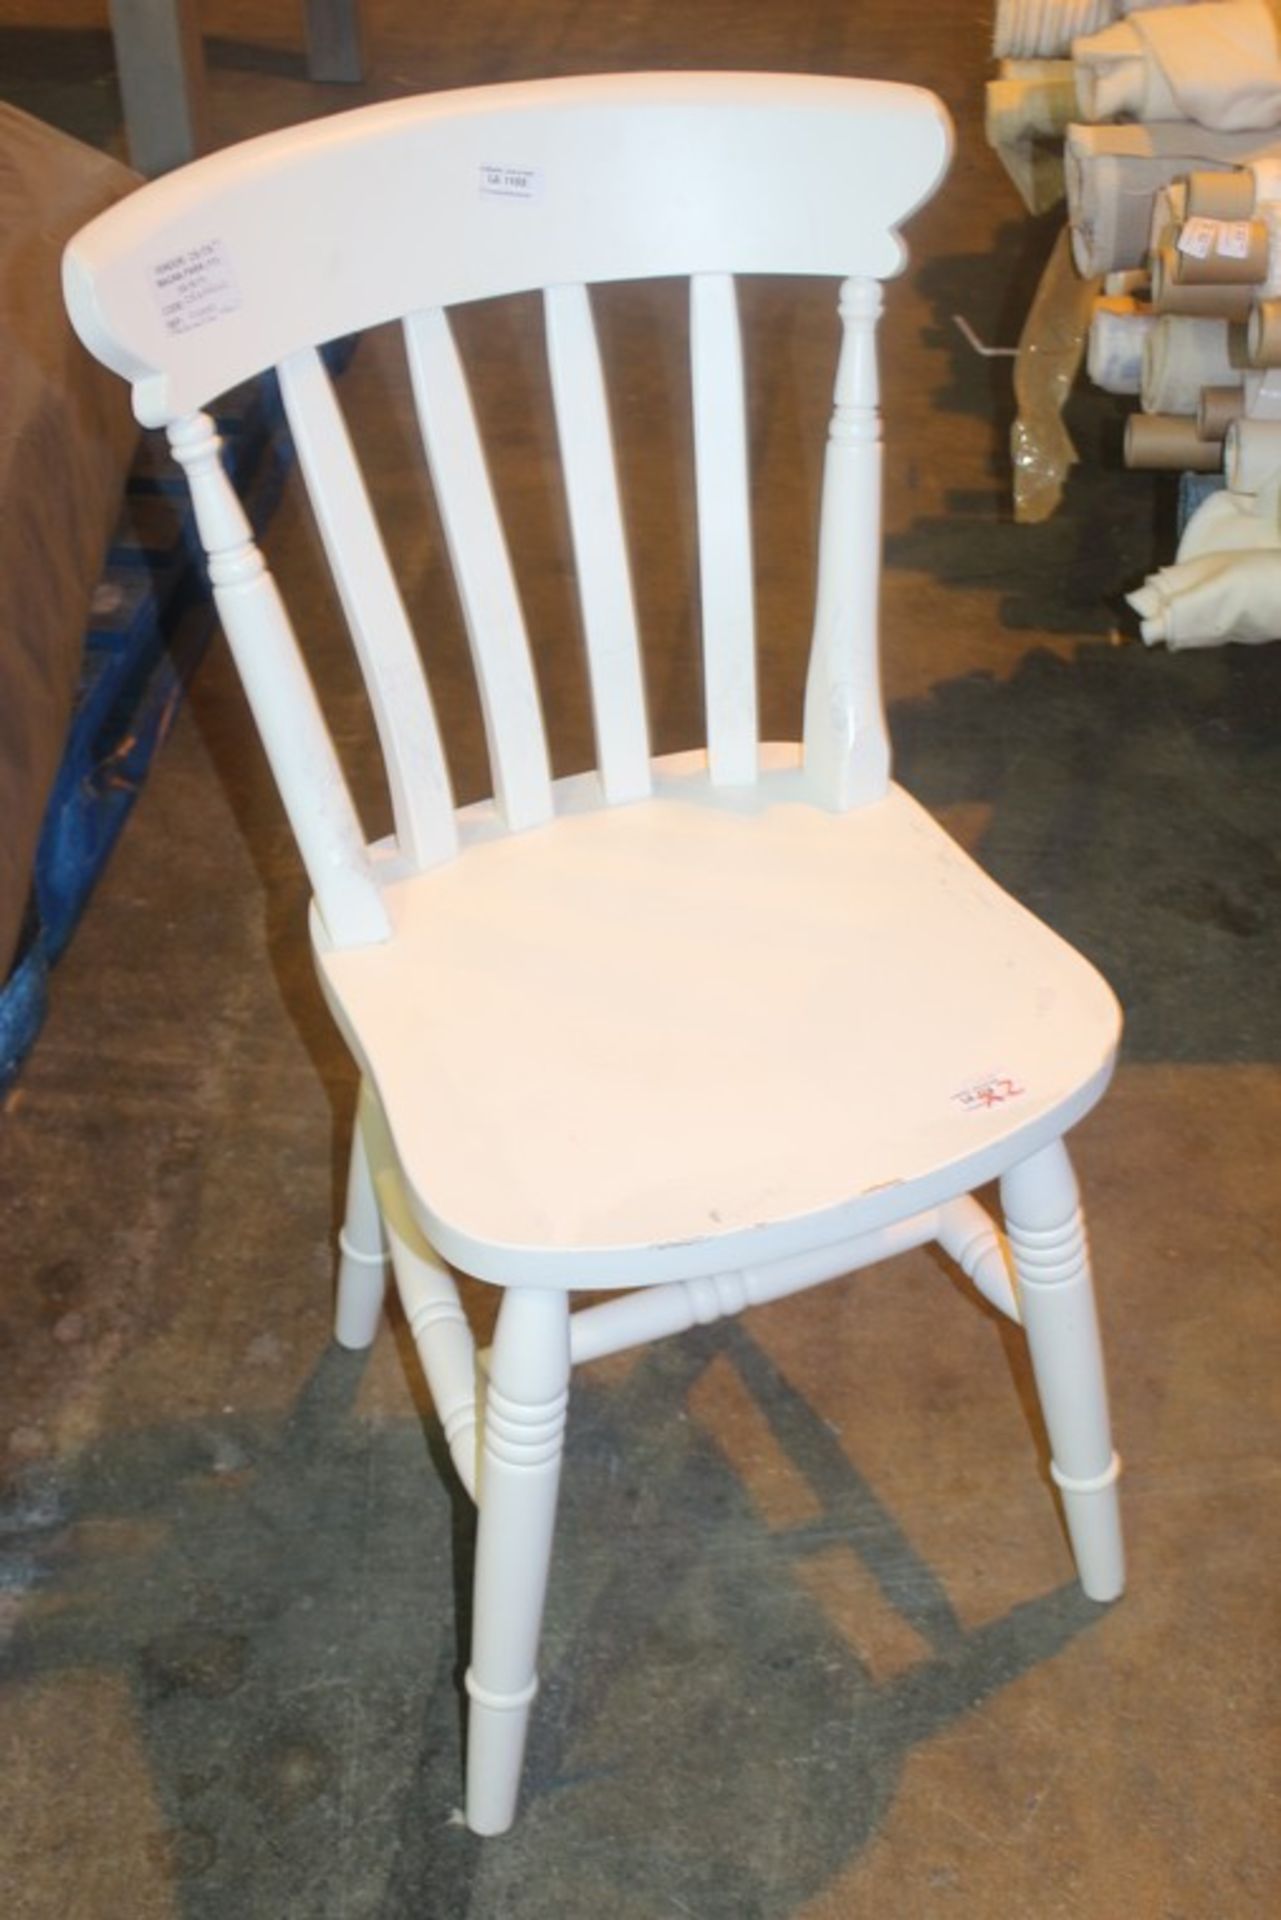 1 x WOODEN WHITE DINING CHAIR RRP £100 (03/10/17) (2545540) *PLEASE NOTE THAT THE BID PRICE IS